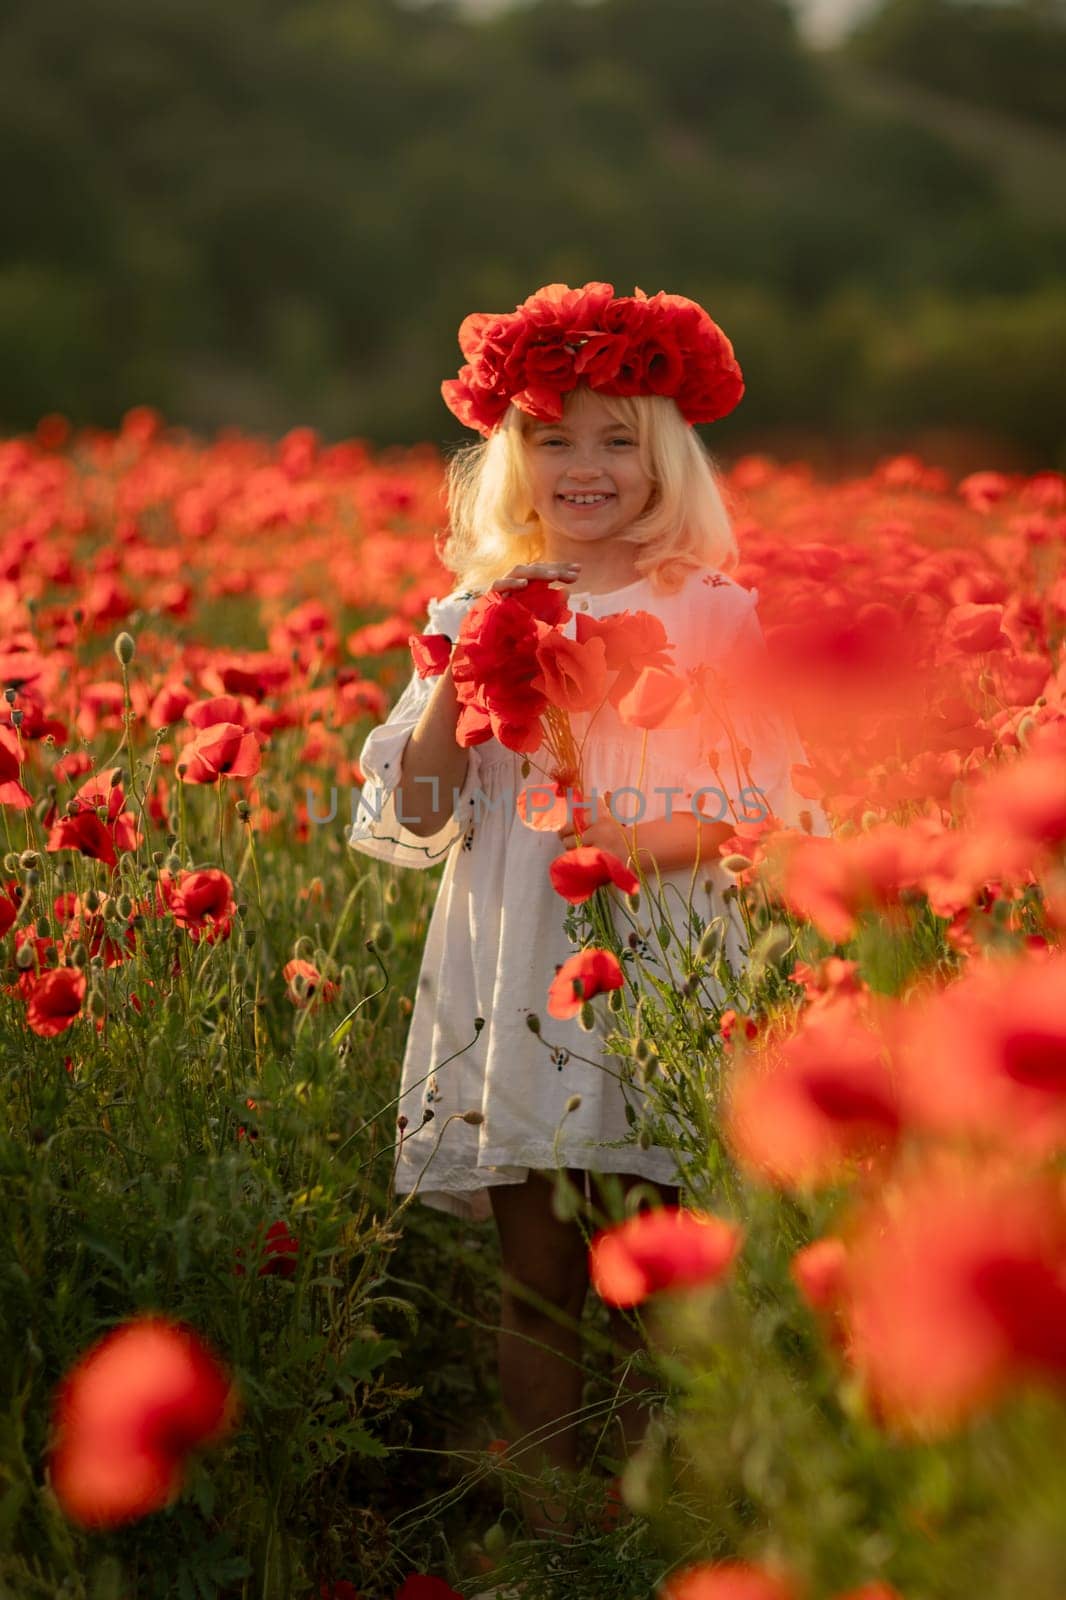 A young girl is standing in a field of red poppies. She is wearing a red headband and a white dress. by Matiunina